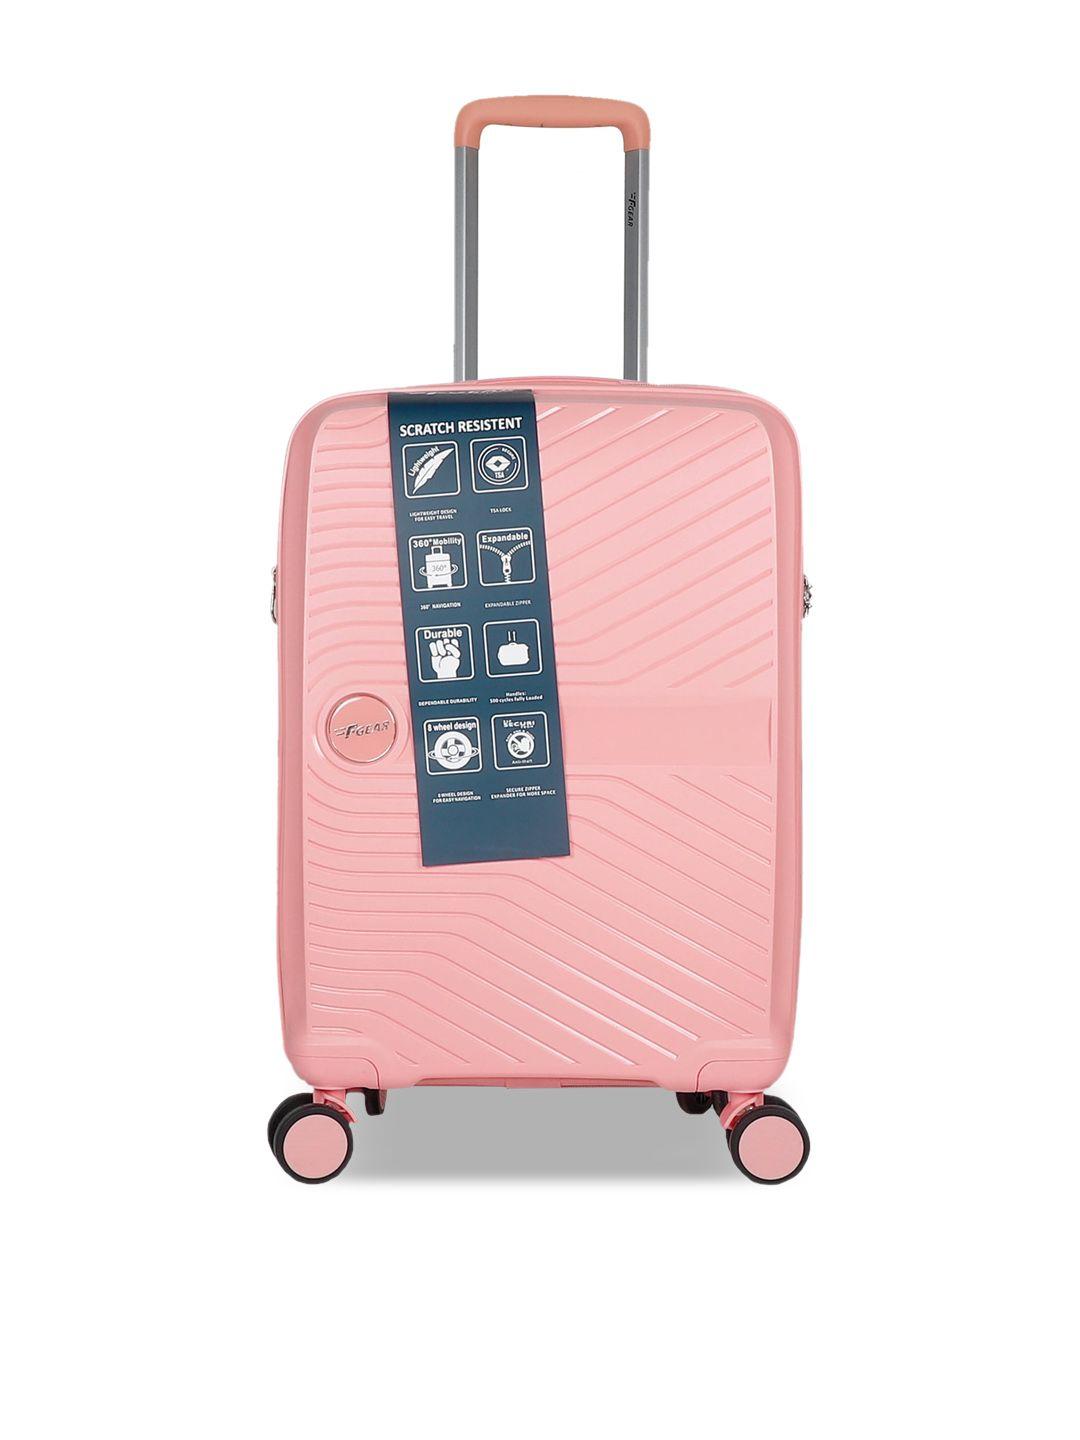 f gear hard-sided textured cabin trolley suitcase